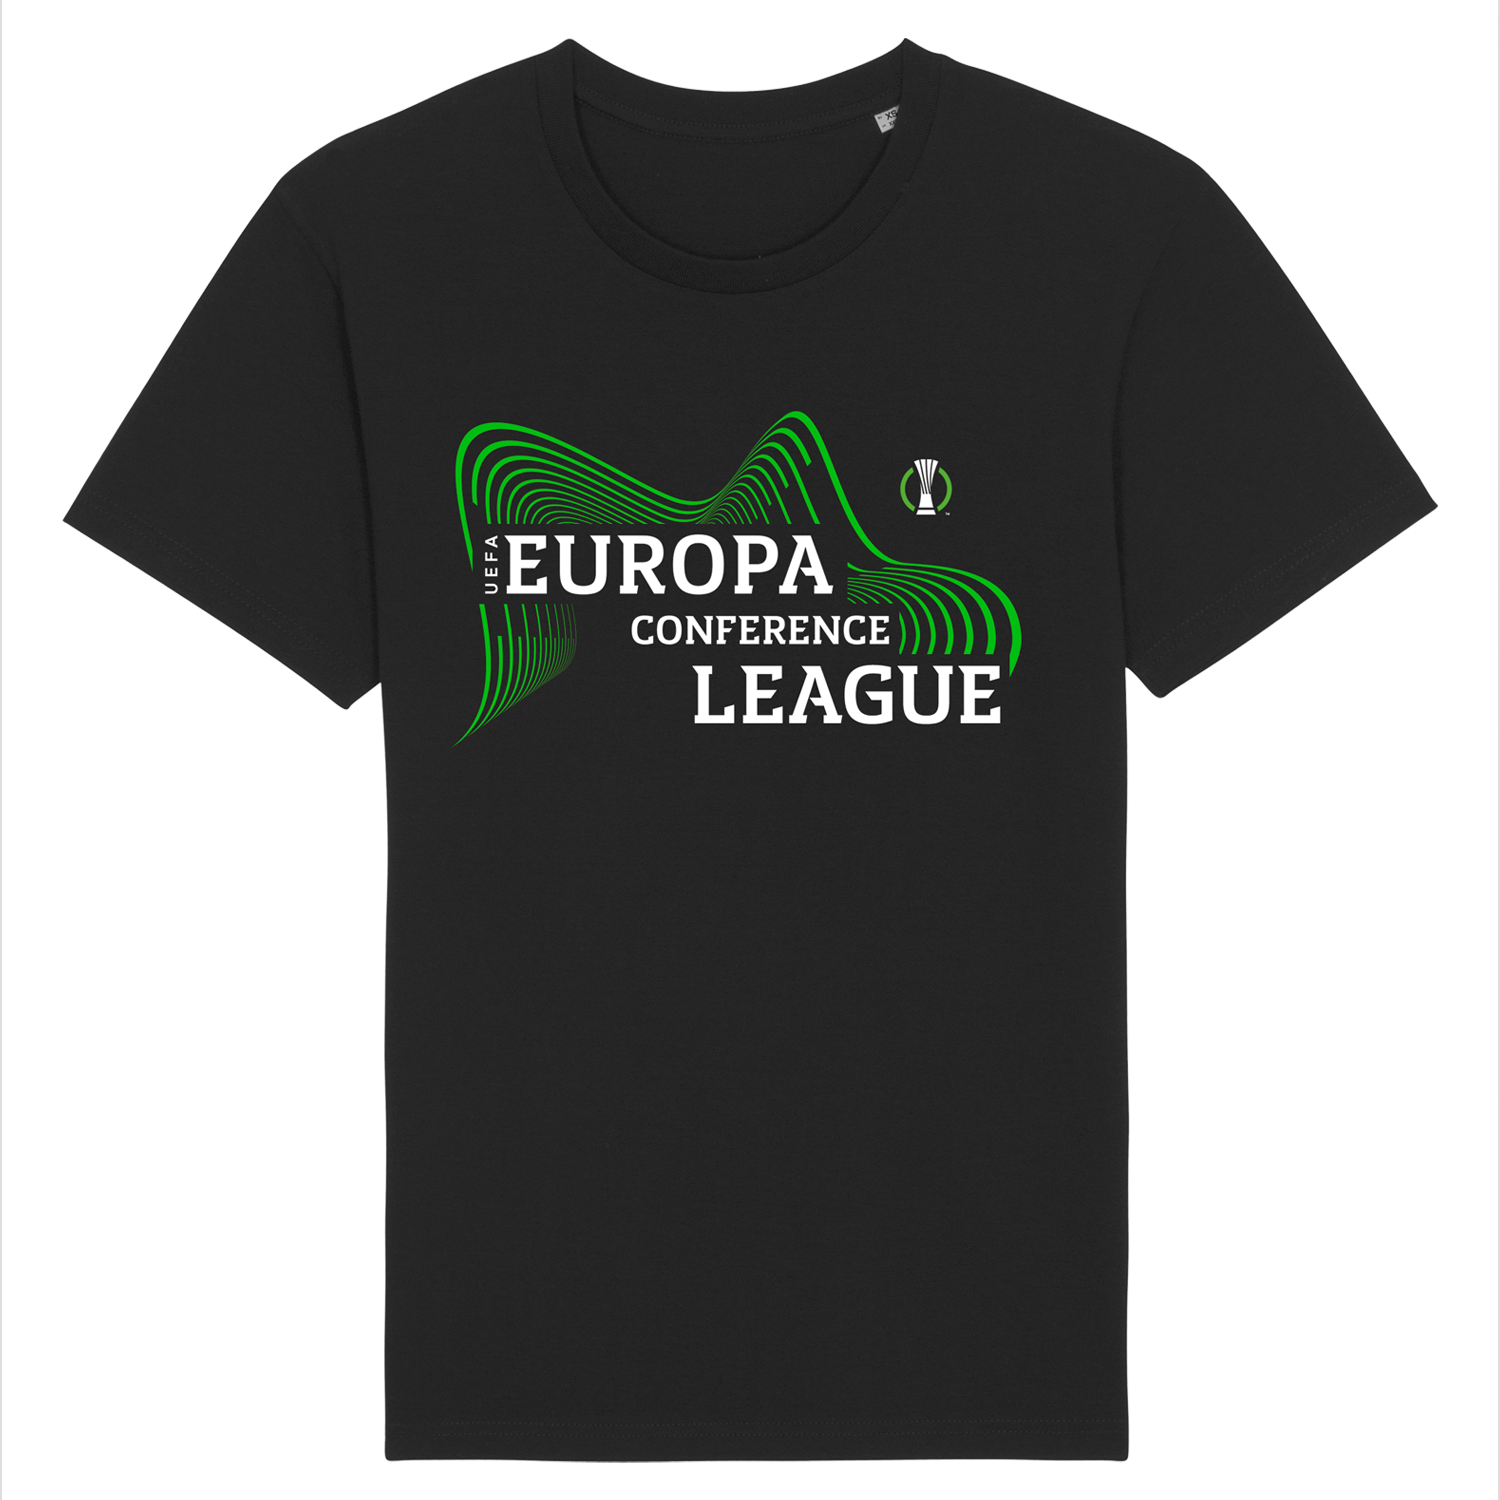 UEFA Europa Conference League - Energy Wave Black T-Shirt UEFA Club Competitions Online Store